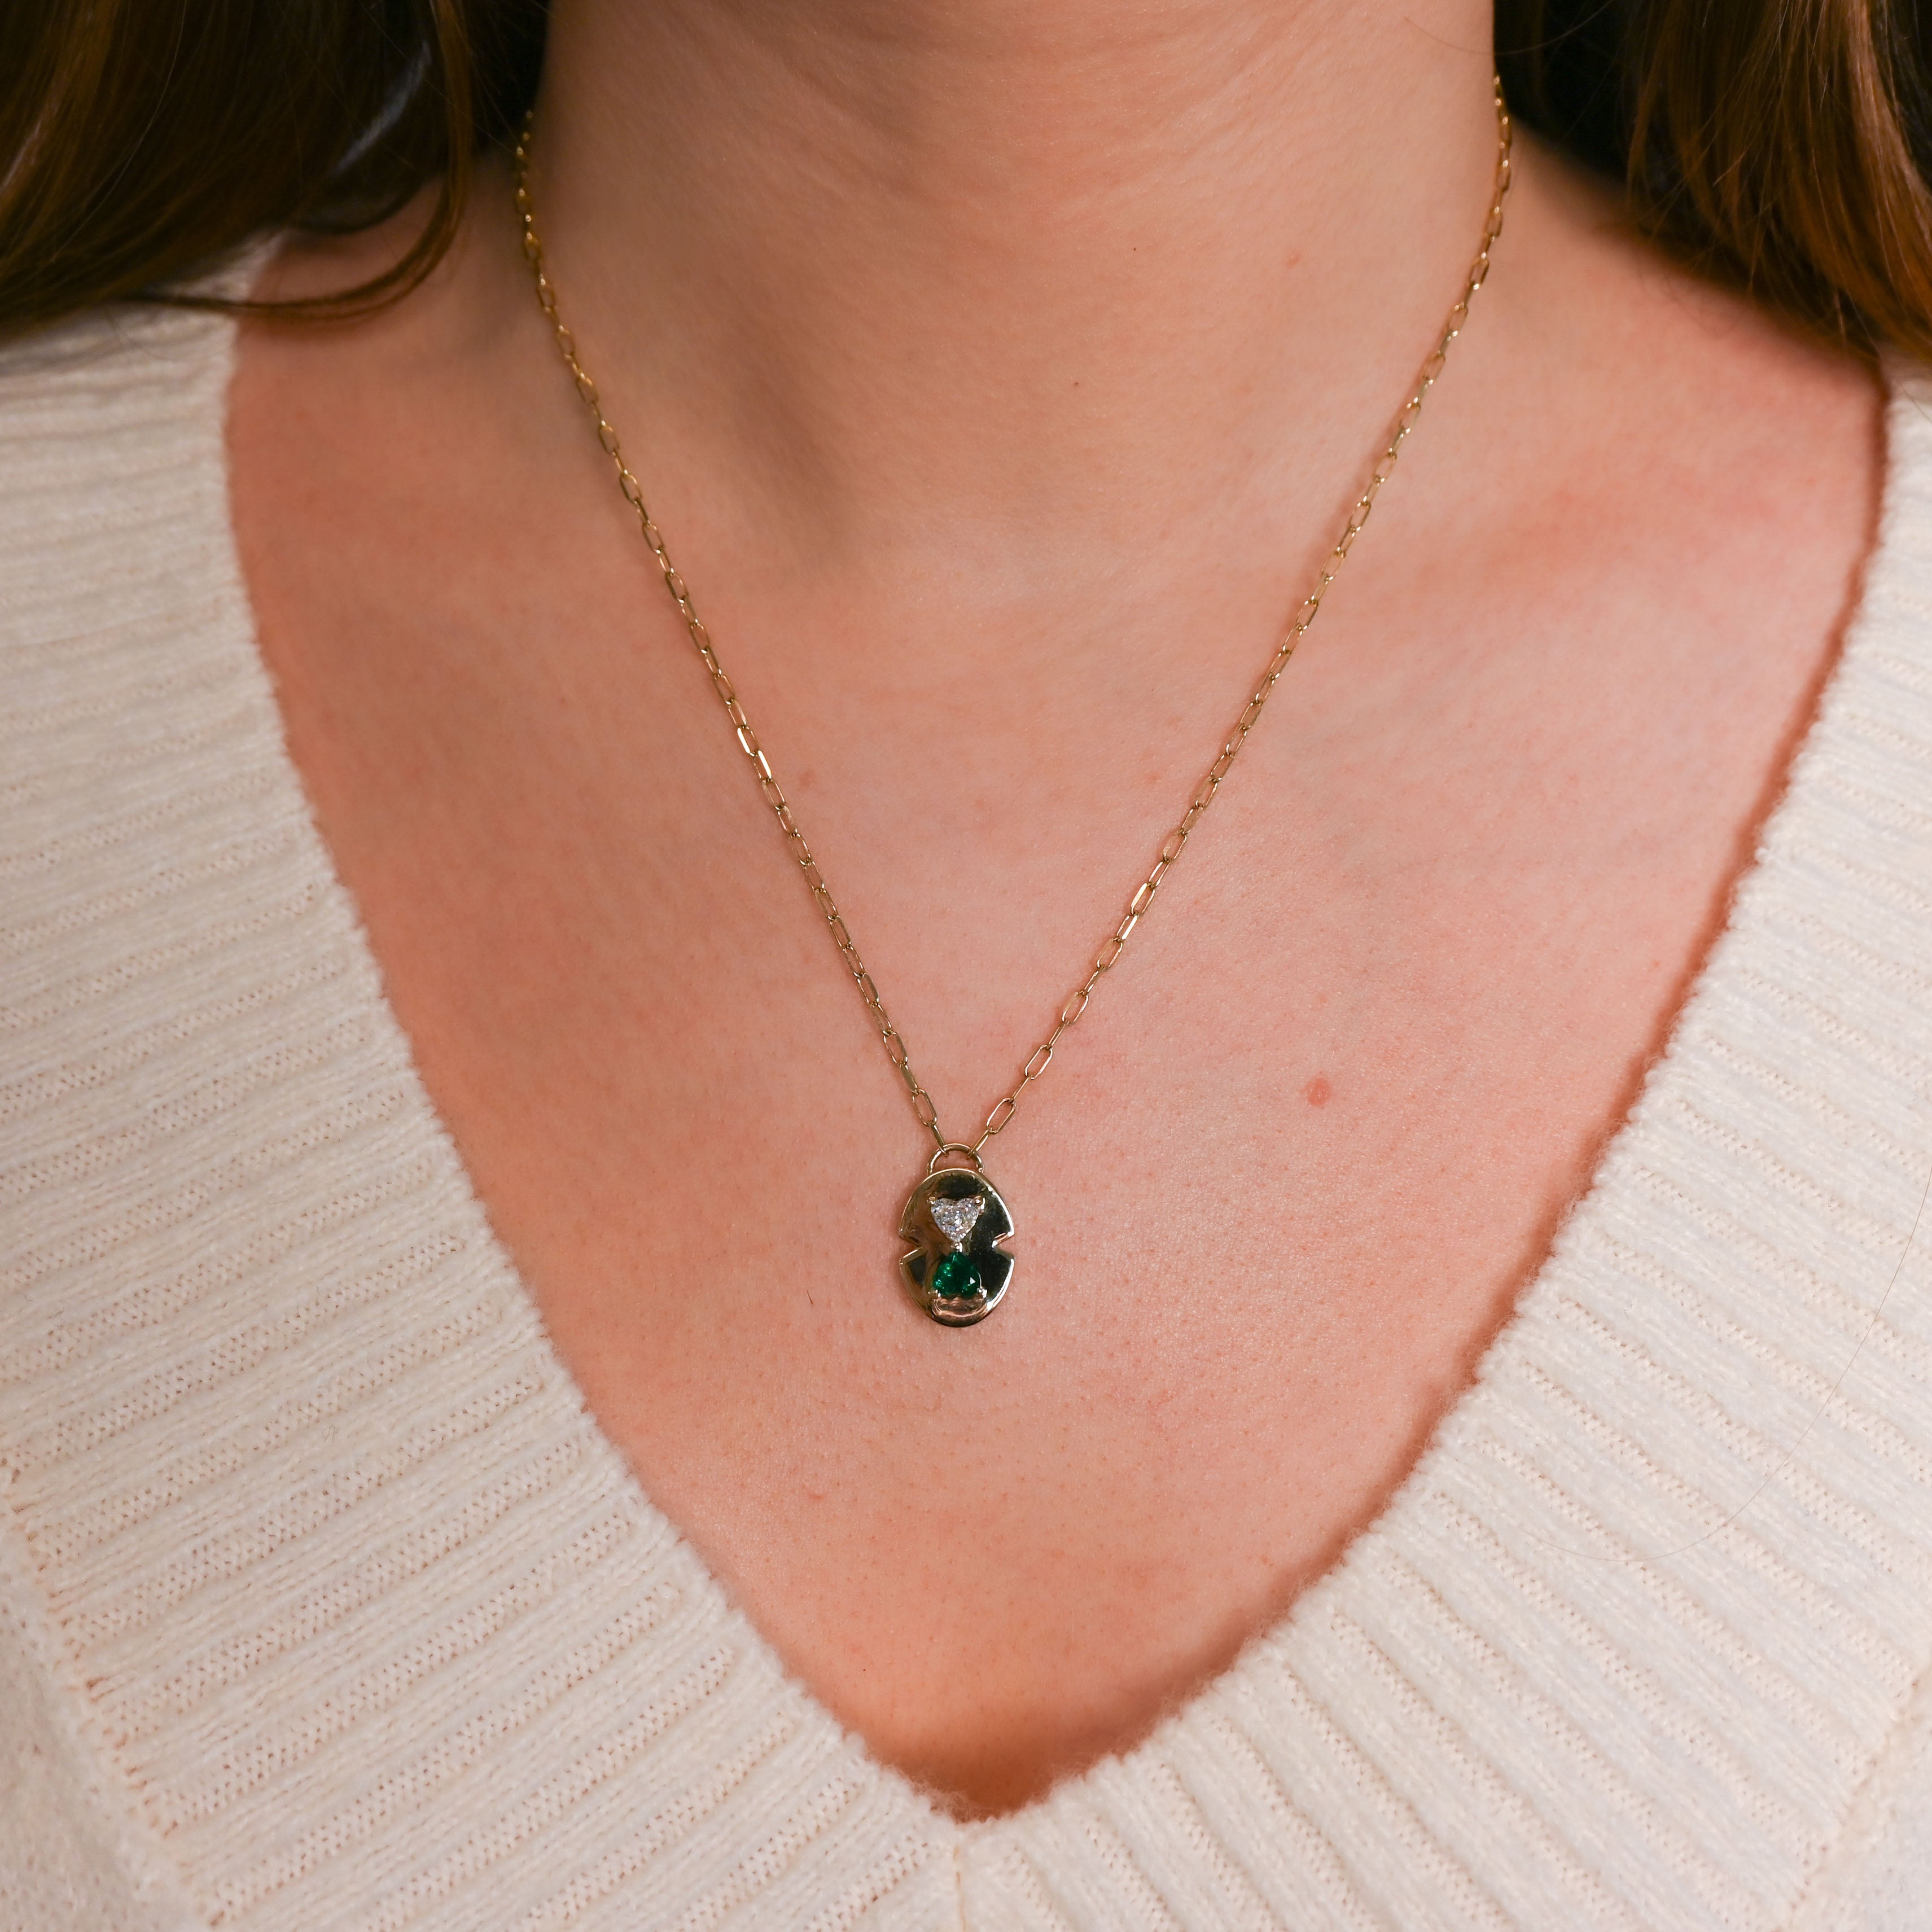 Diamond and Emerald Medallion Necklace